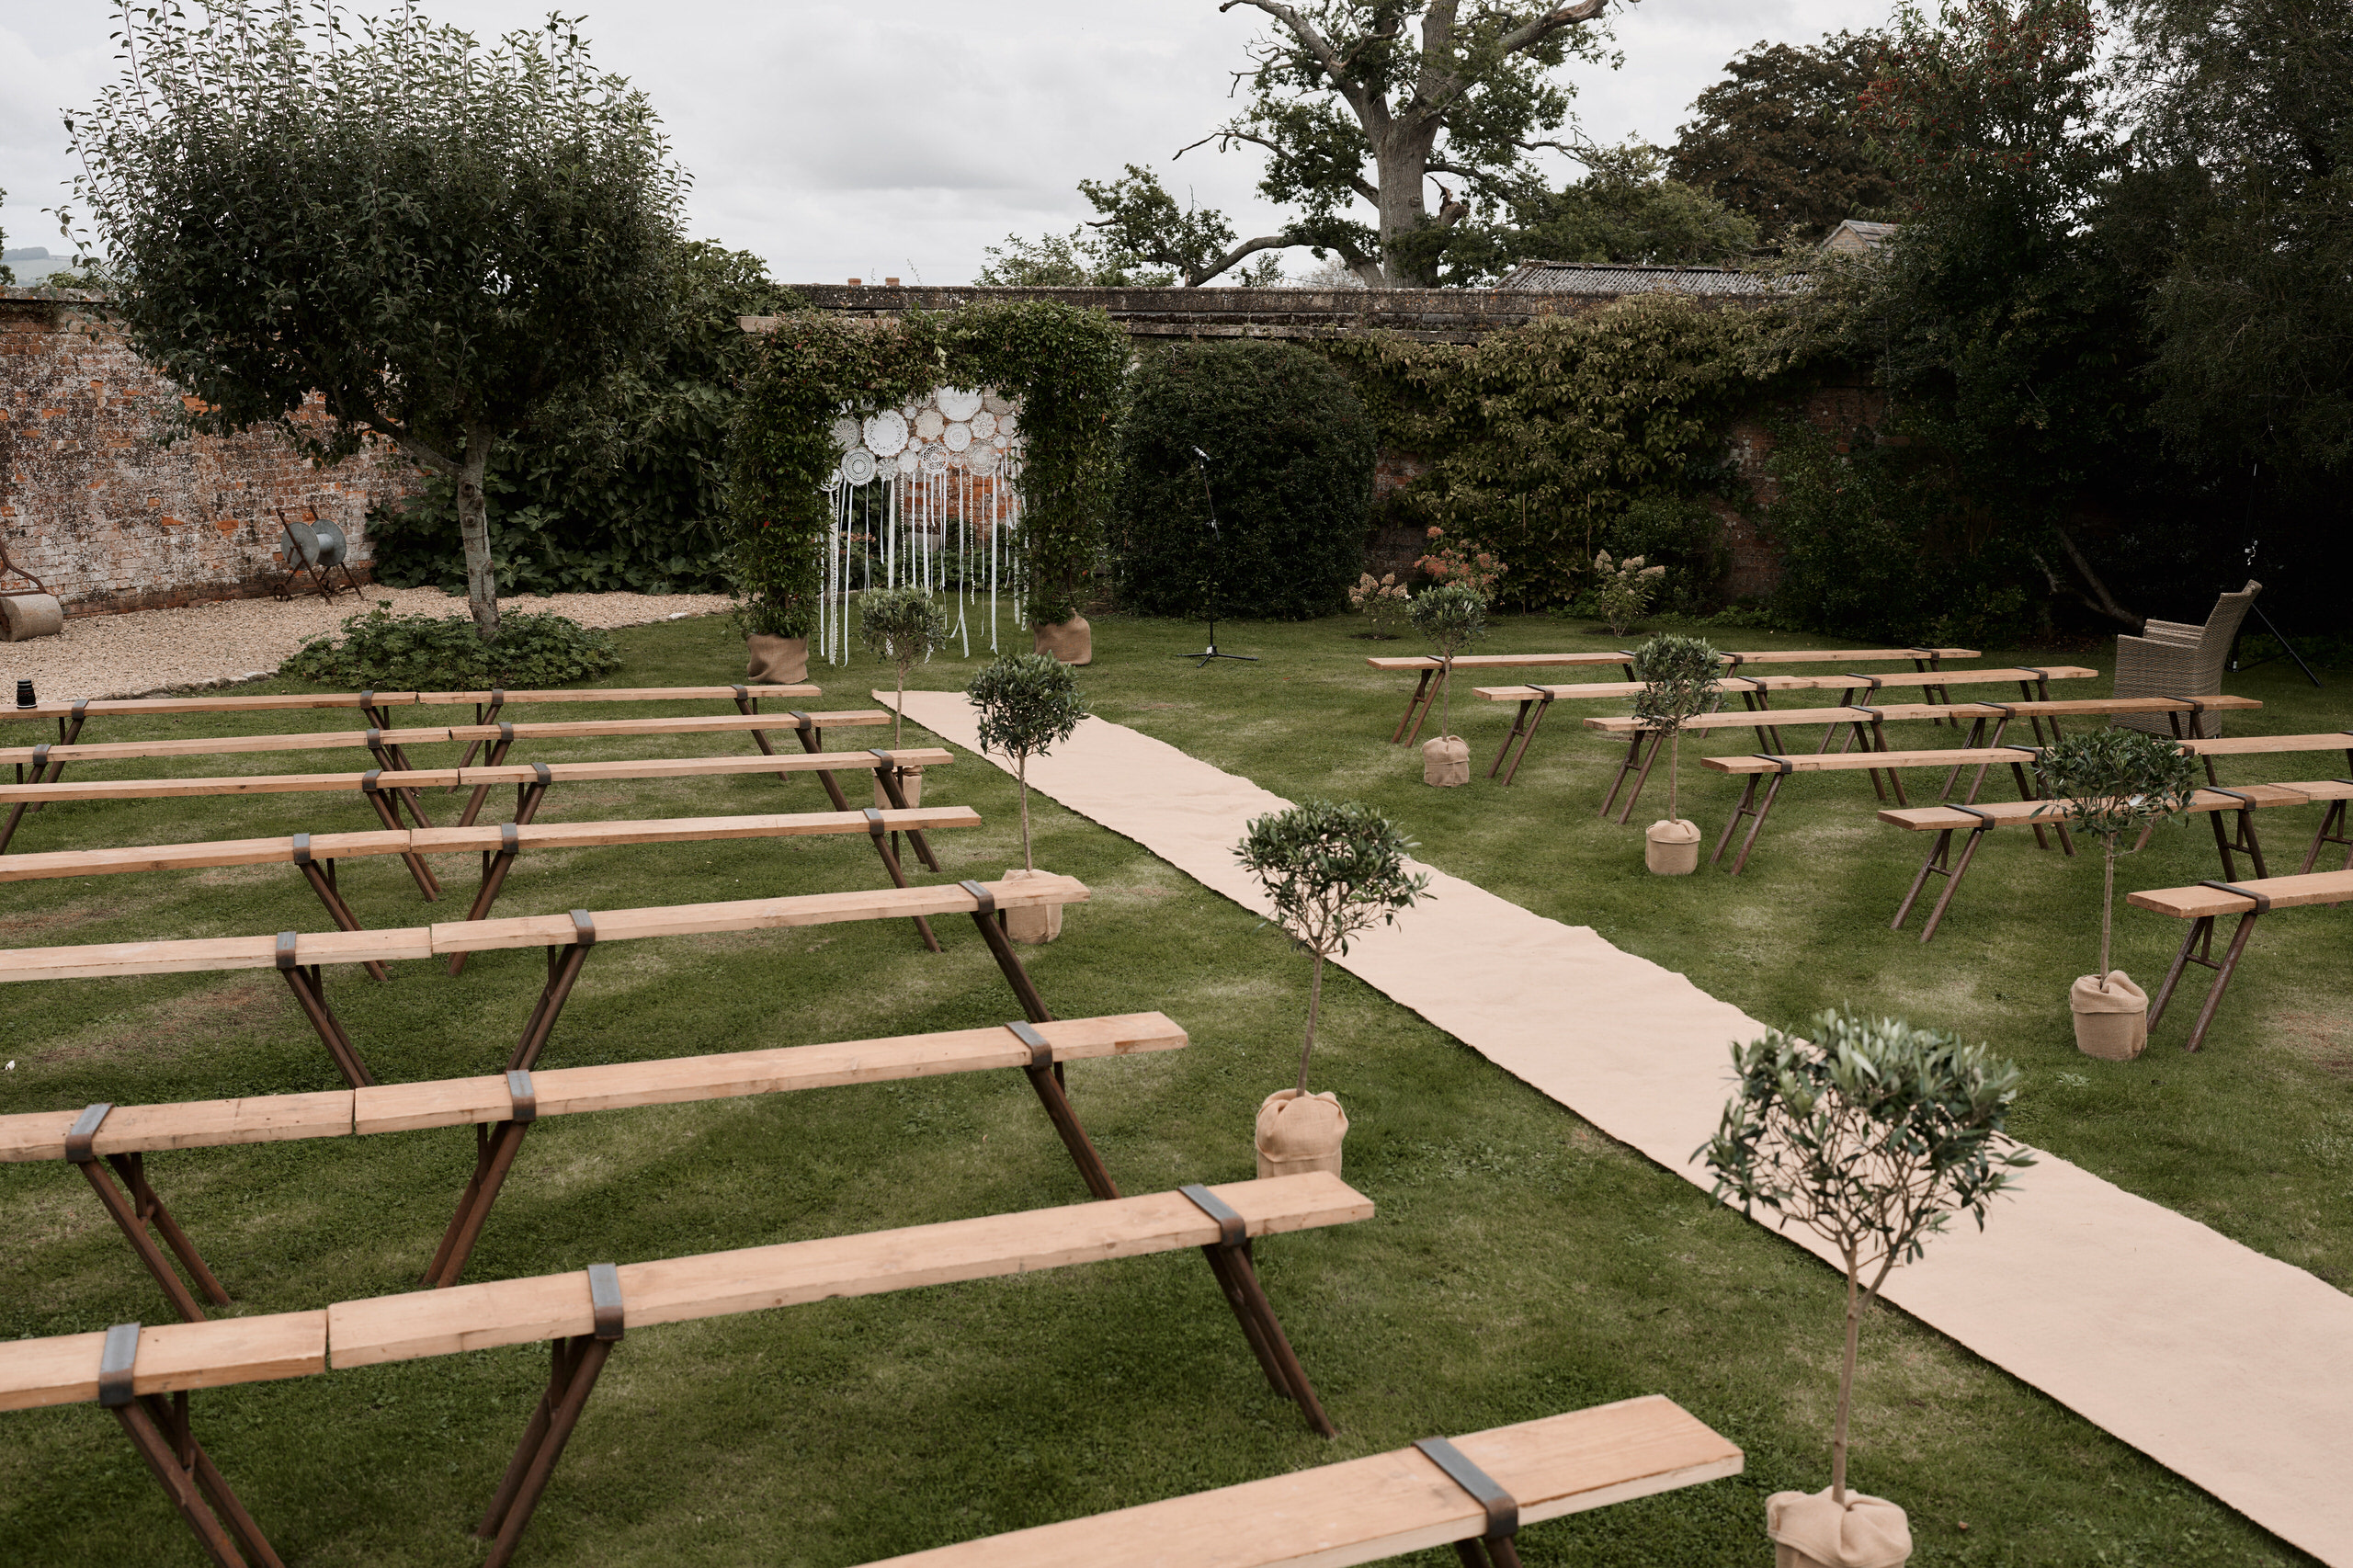 A wedding ceremony is being set up outside with wooden benches.